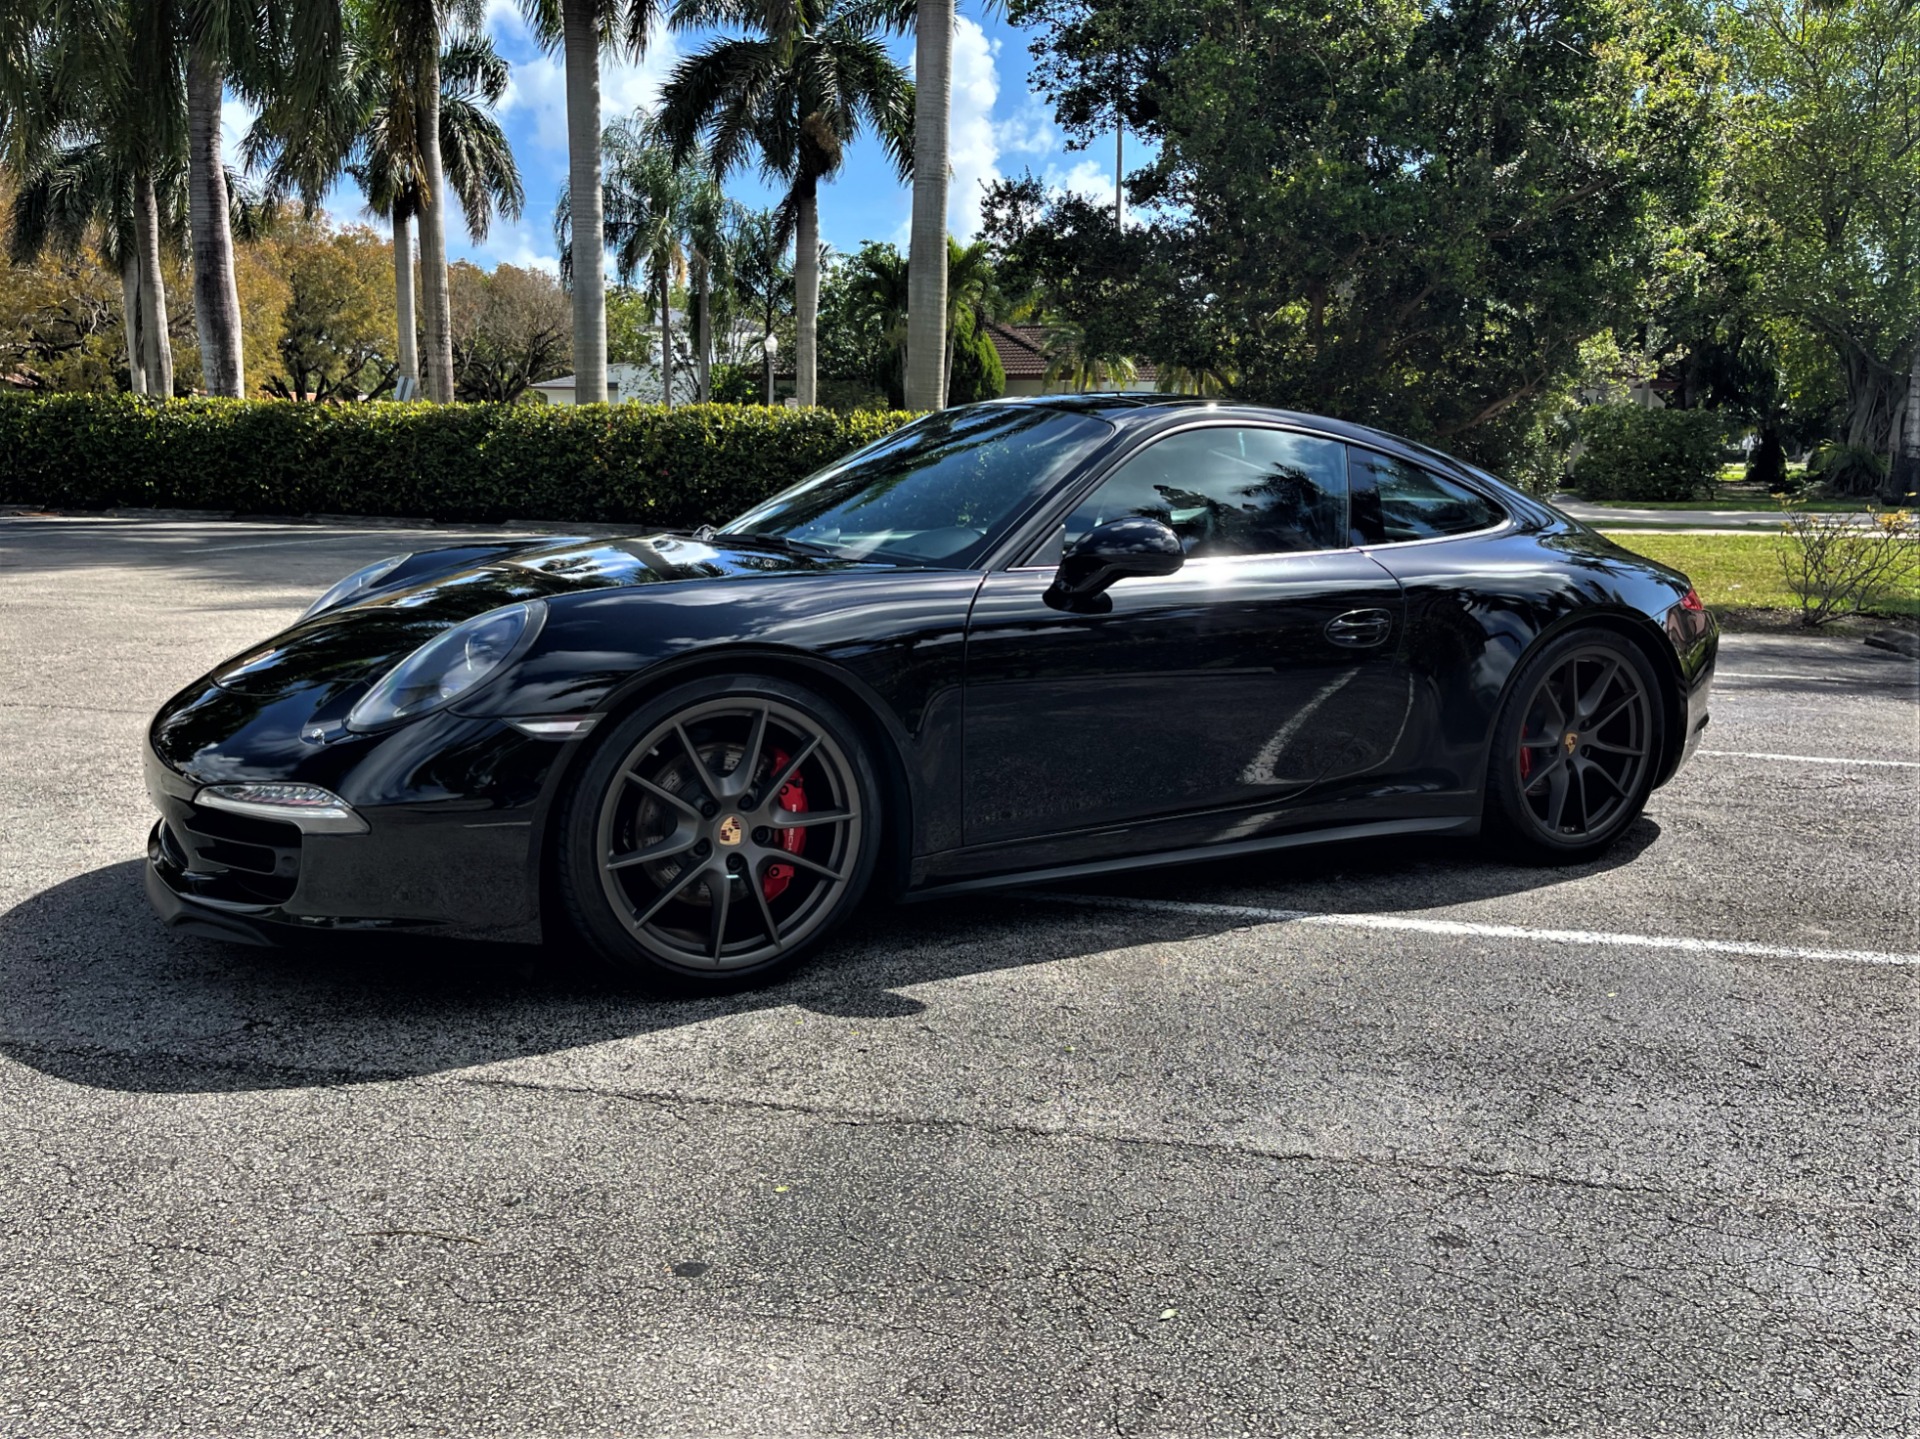 Used 2015 Porsche 911 Carrera 4S for sale Sold at The Gables Sports Cars in Miami FL 33146 2